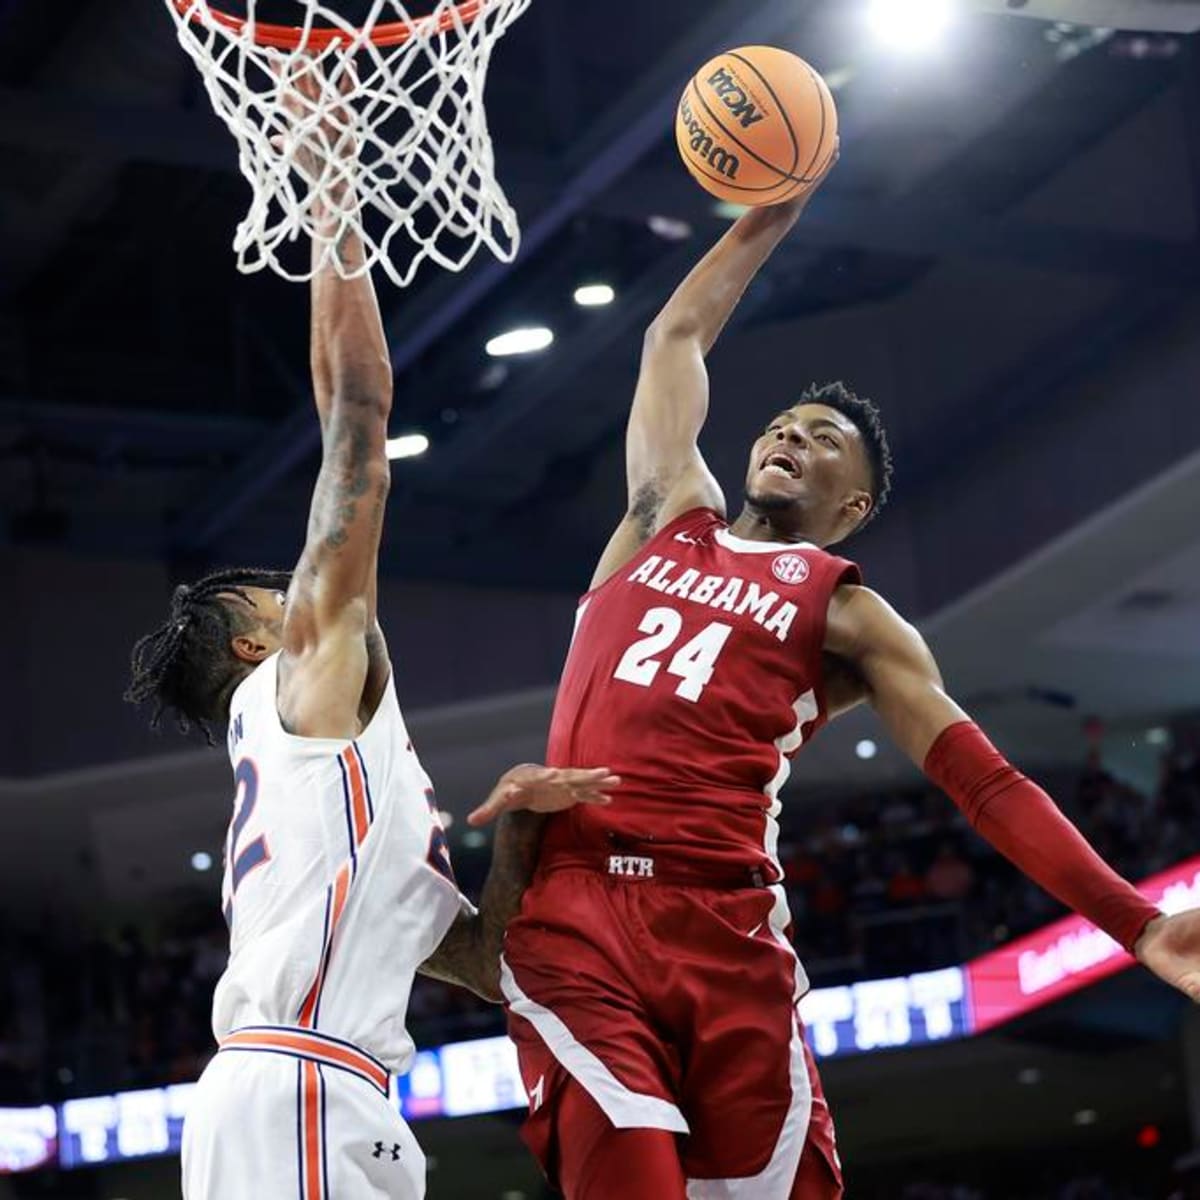 Alabama Escapes Auburn with 77-69 Win, Stays Undefeated in SEC Play